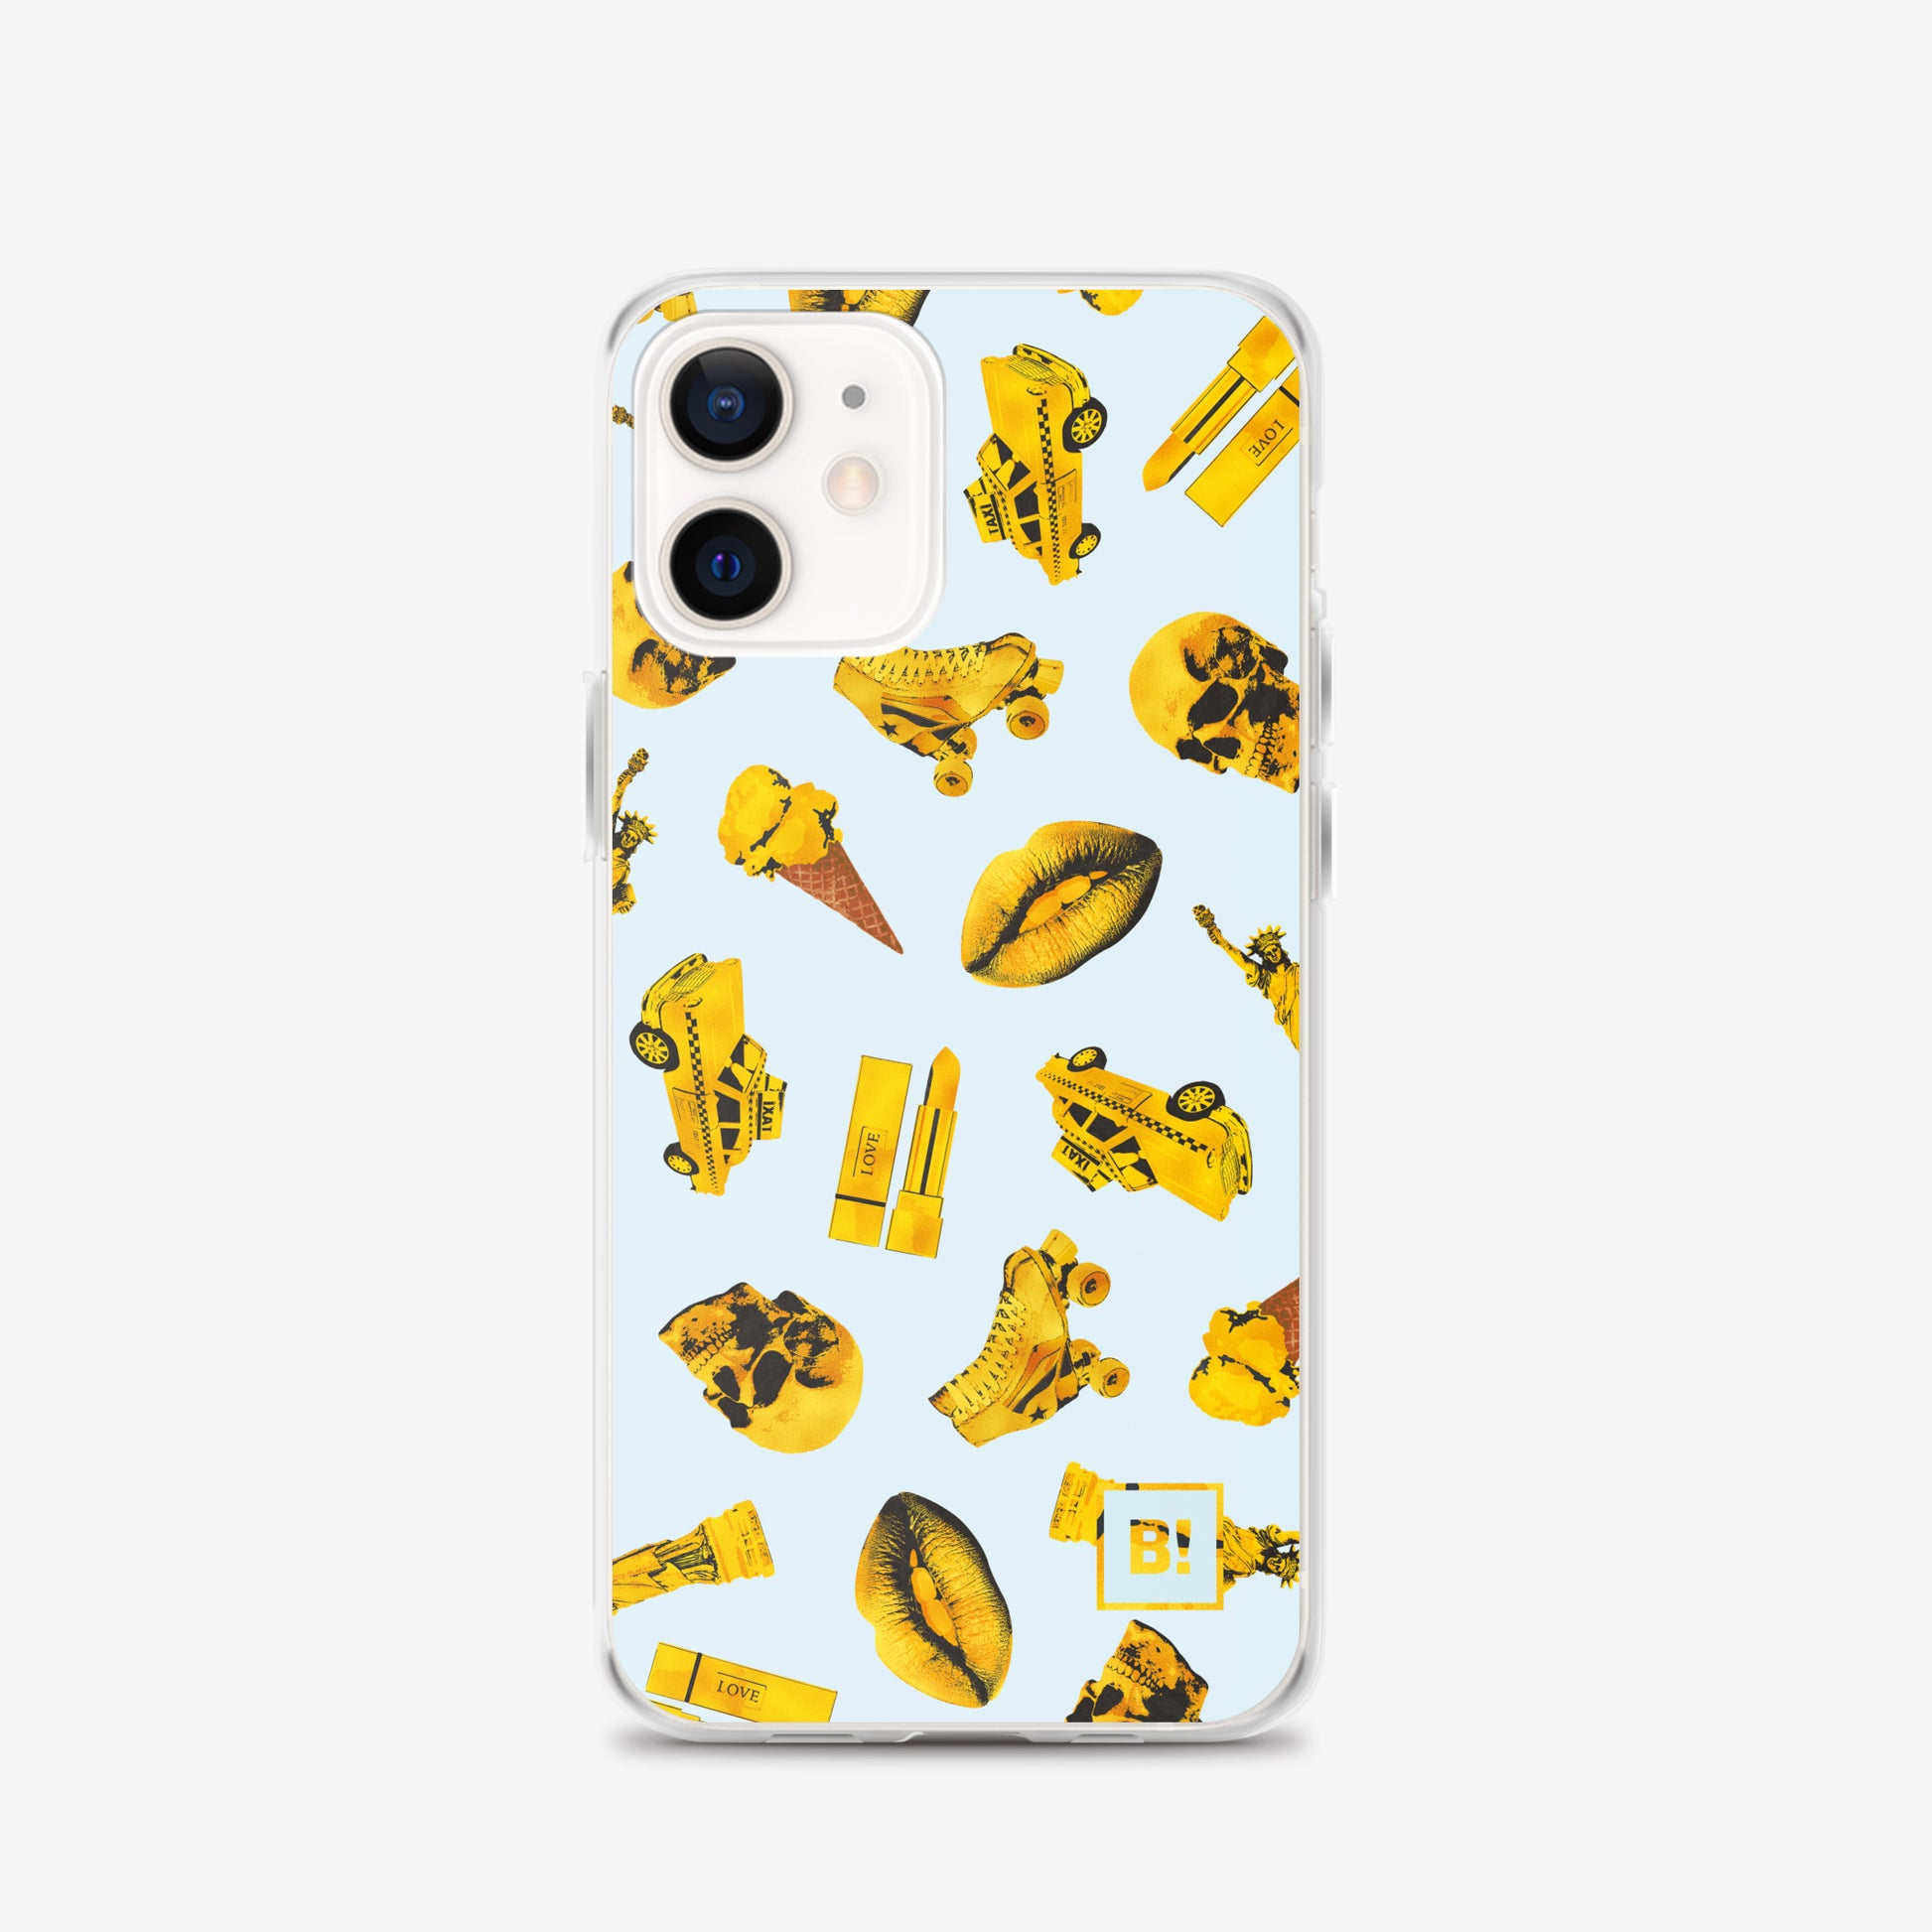 Binspired Golden Collection Pacific Pop Art iPhone 12 Clear Case